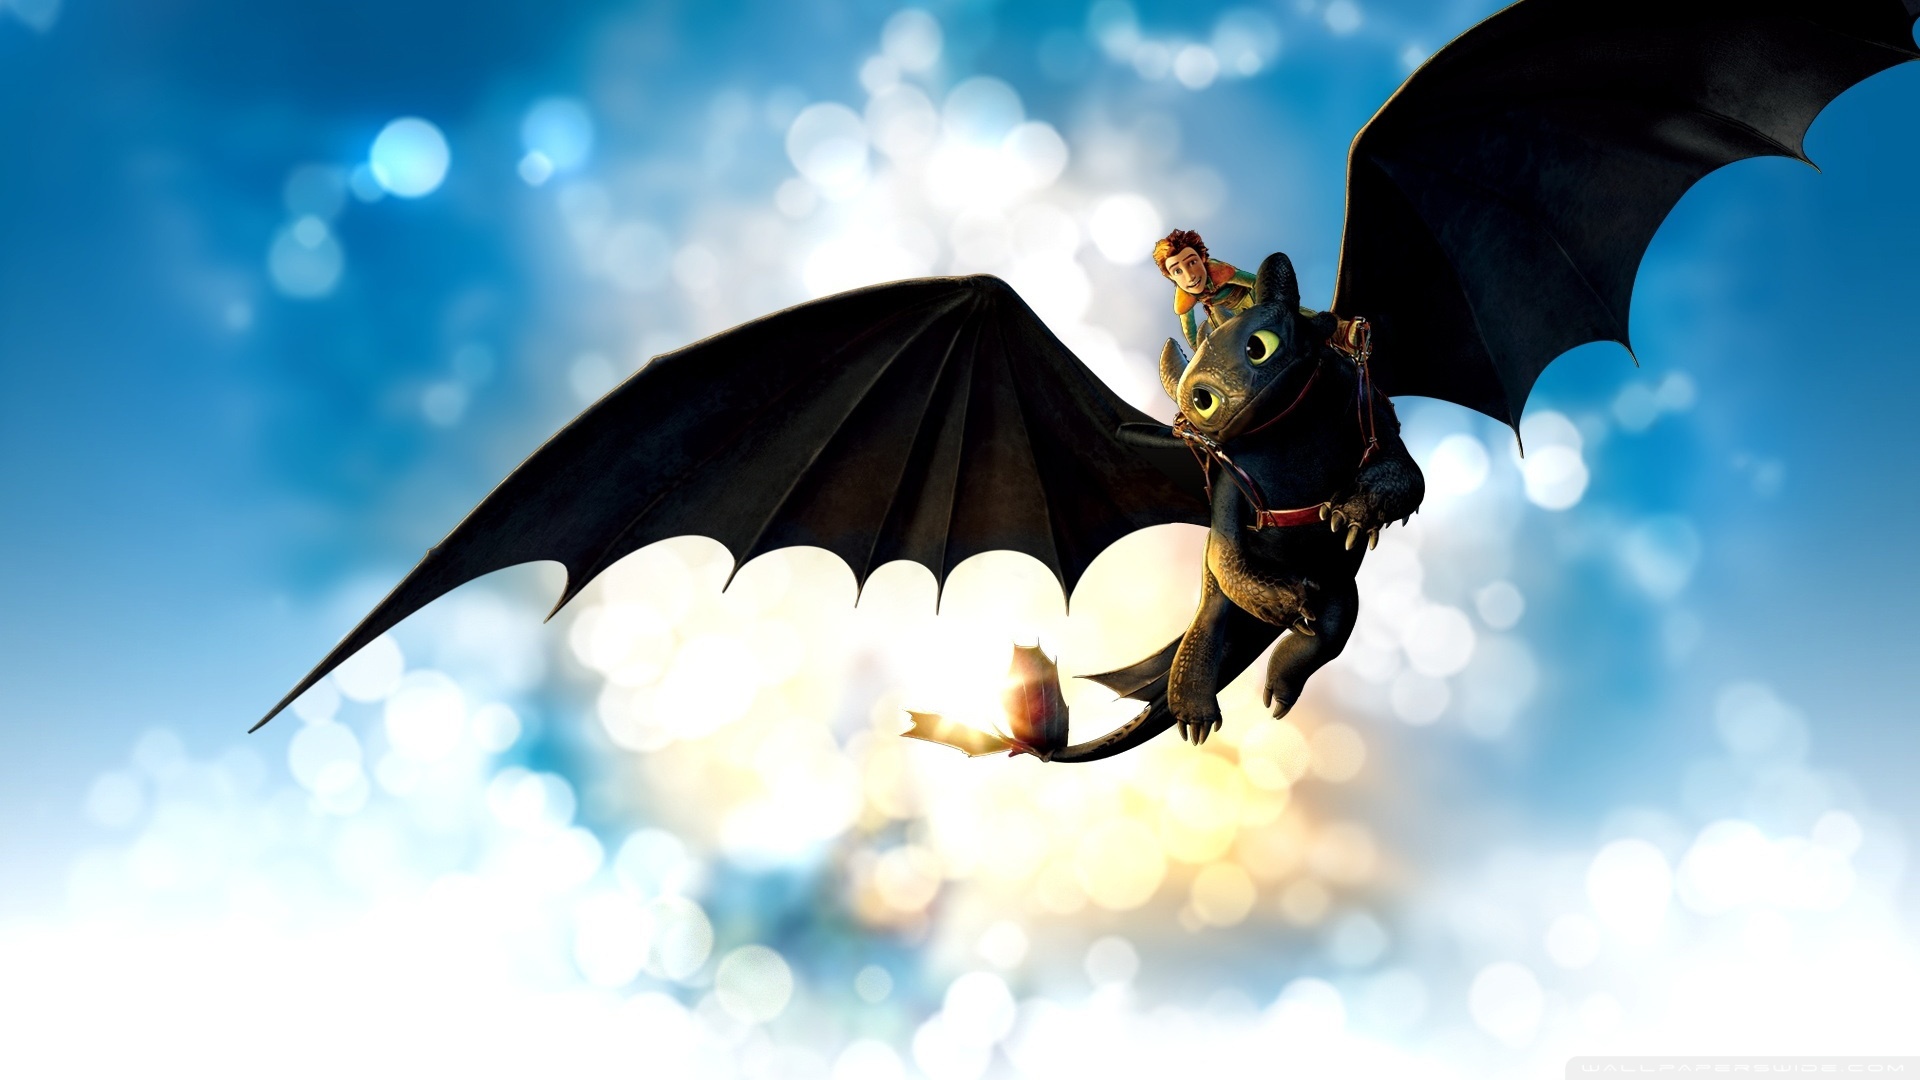 Movie How To Train Your Dragon HD Wallpaper Background Image. 